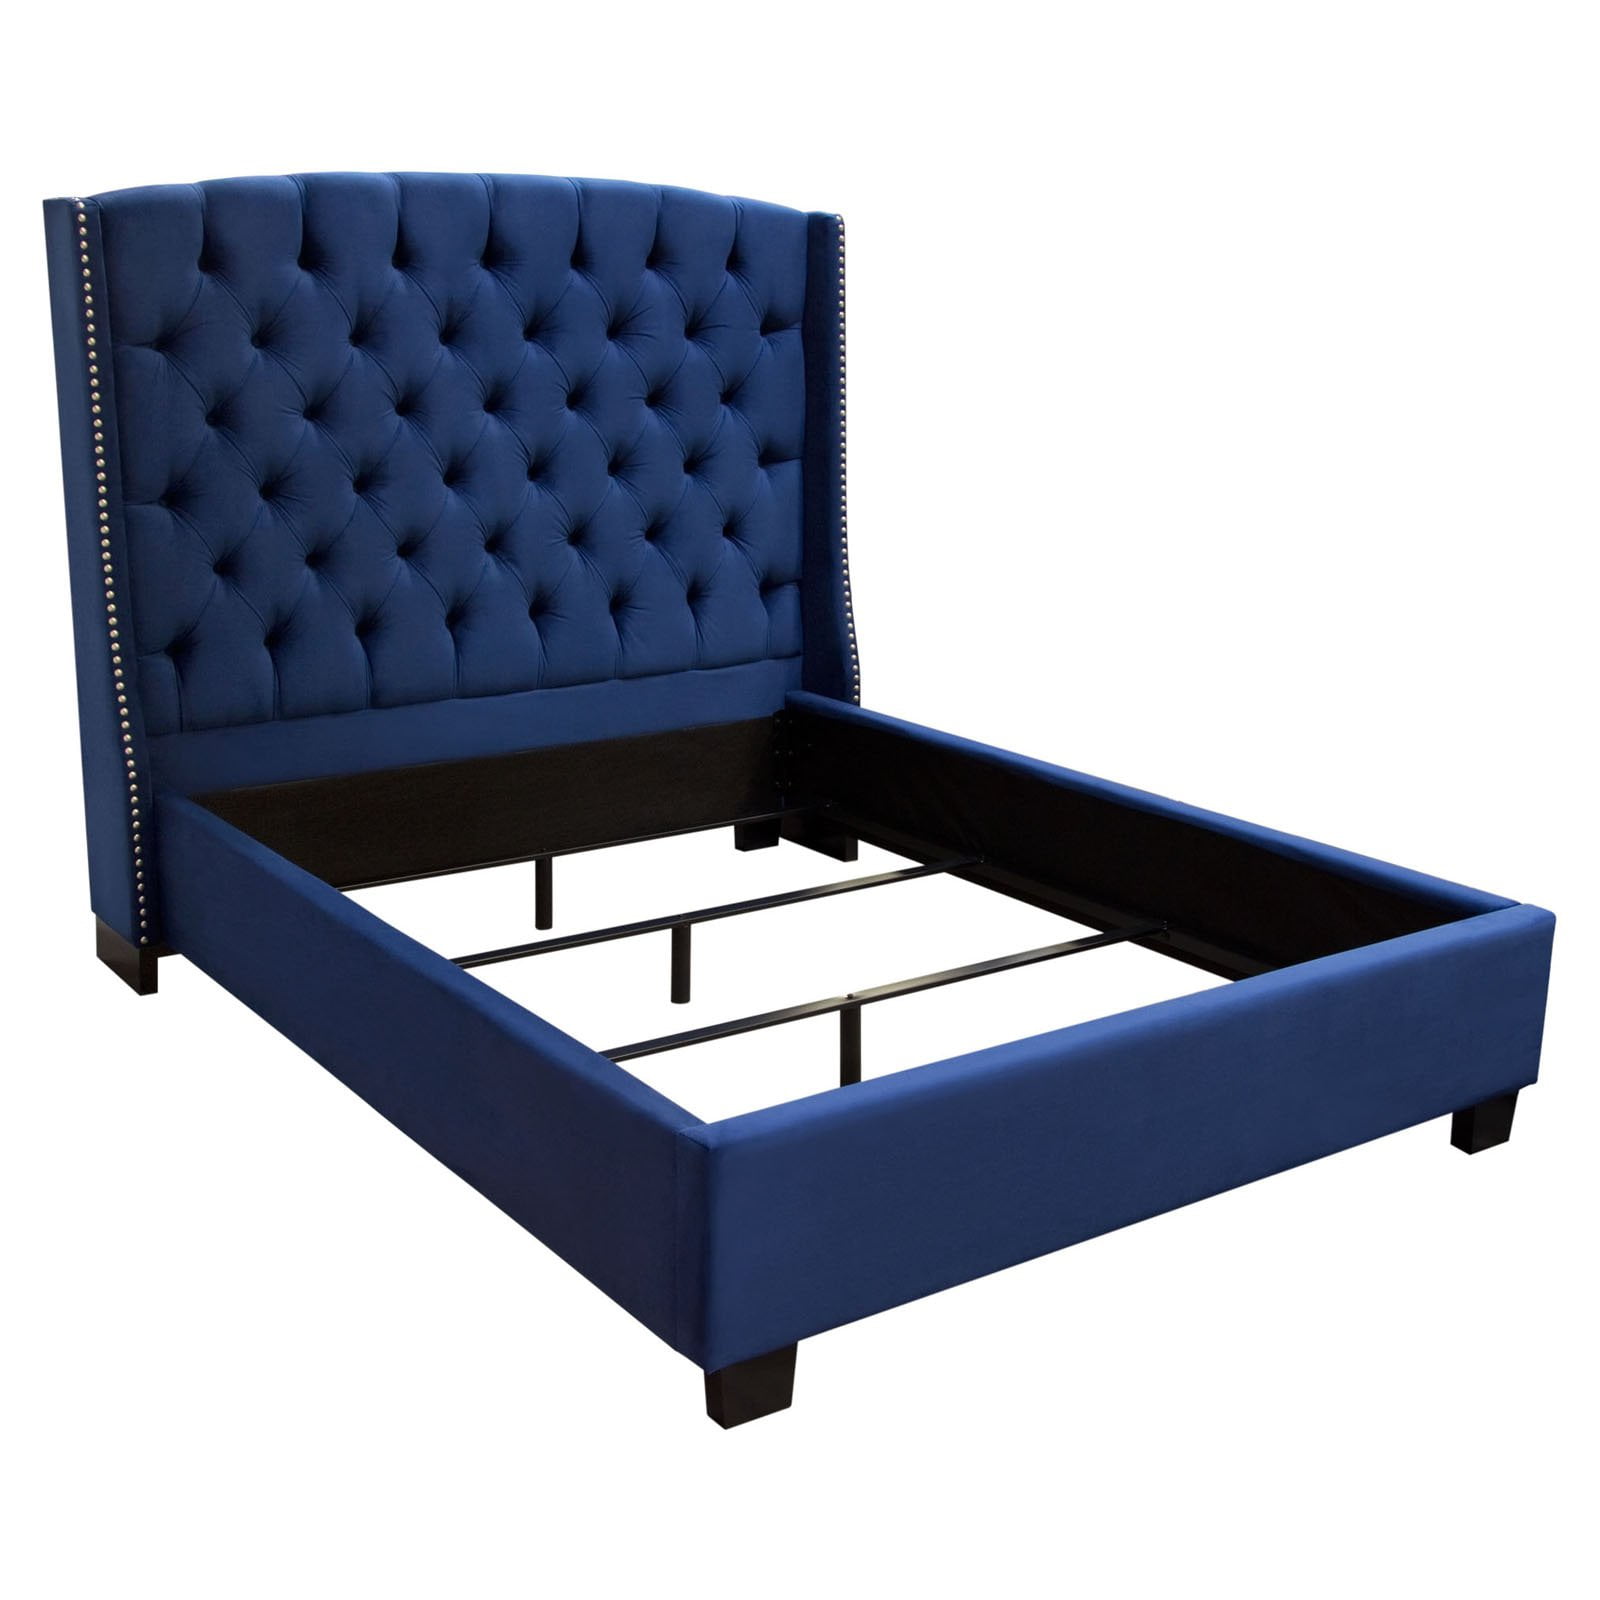 MAJESTICQUBEDNB Majestic Queen Size Tufted Bed with Nail Head Wing Accents, Royal Navy Blue Velvet -  Diamond Sofa